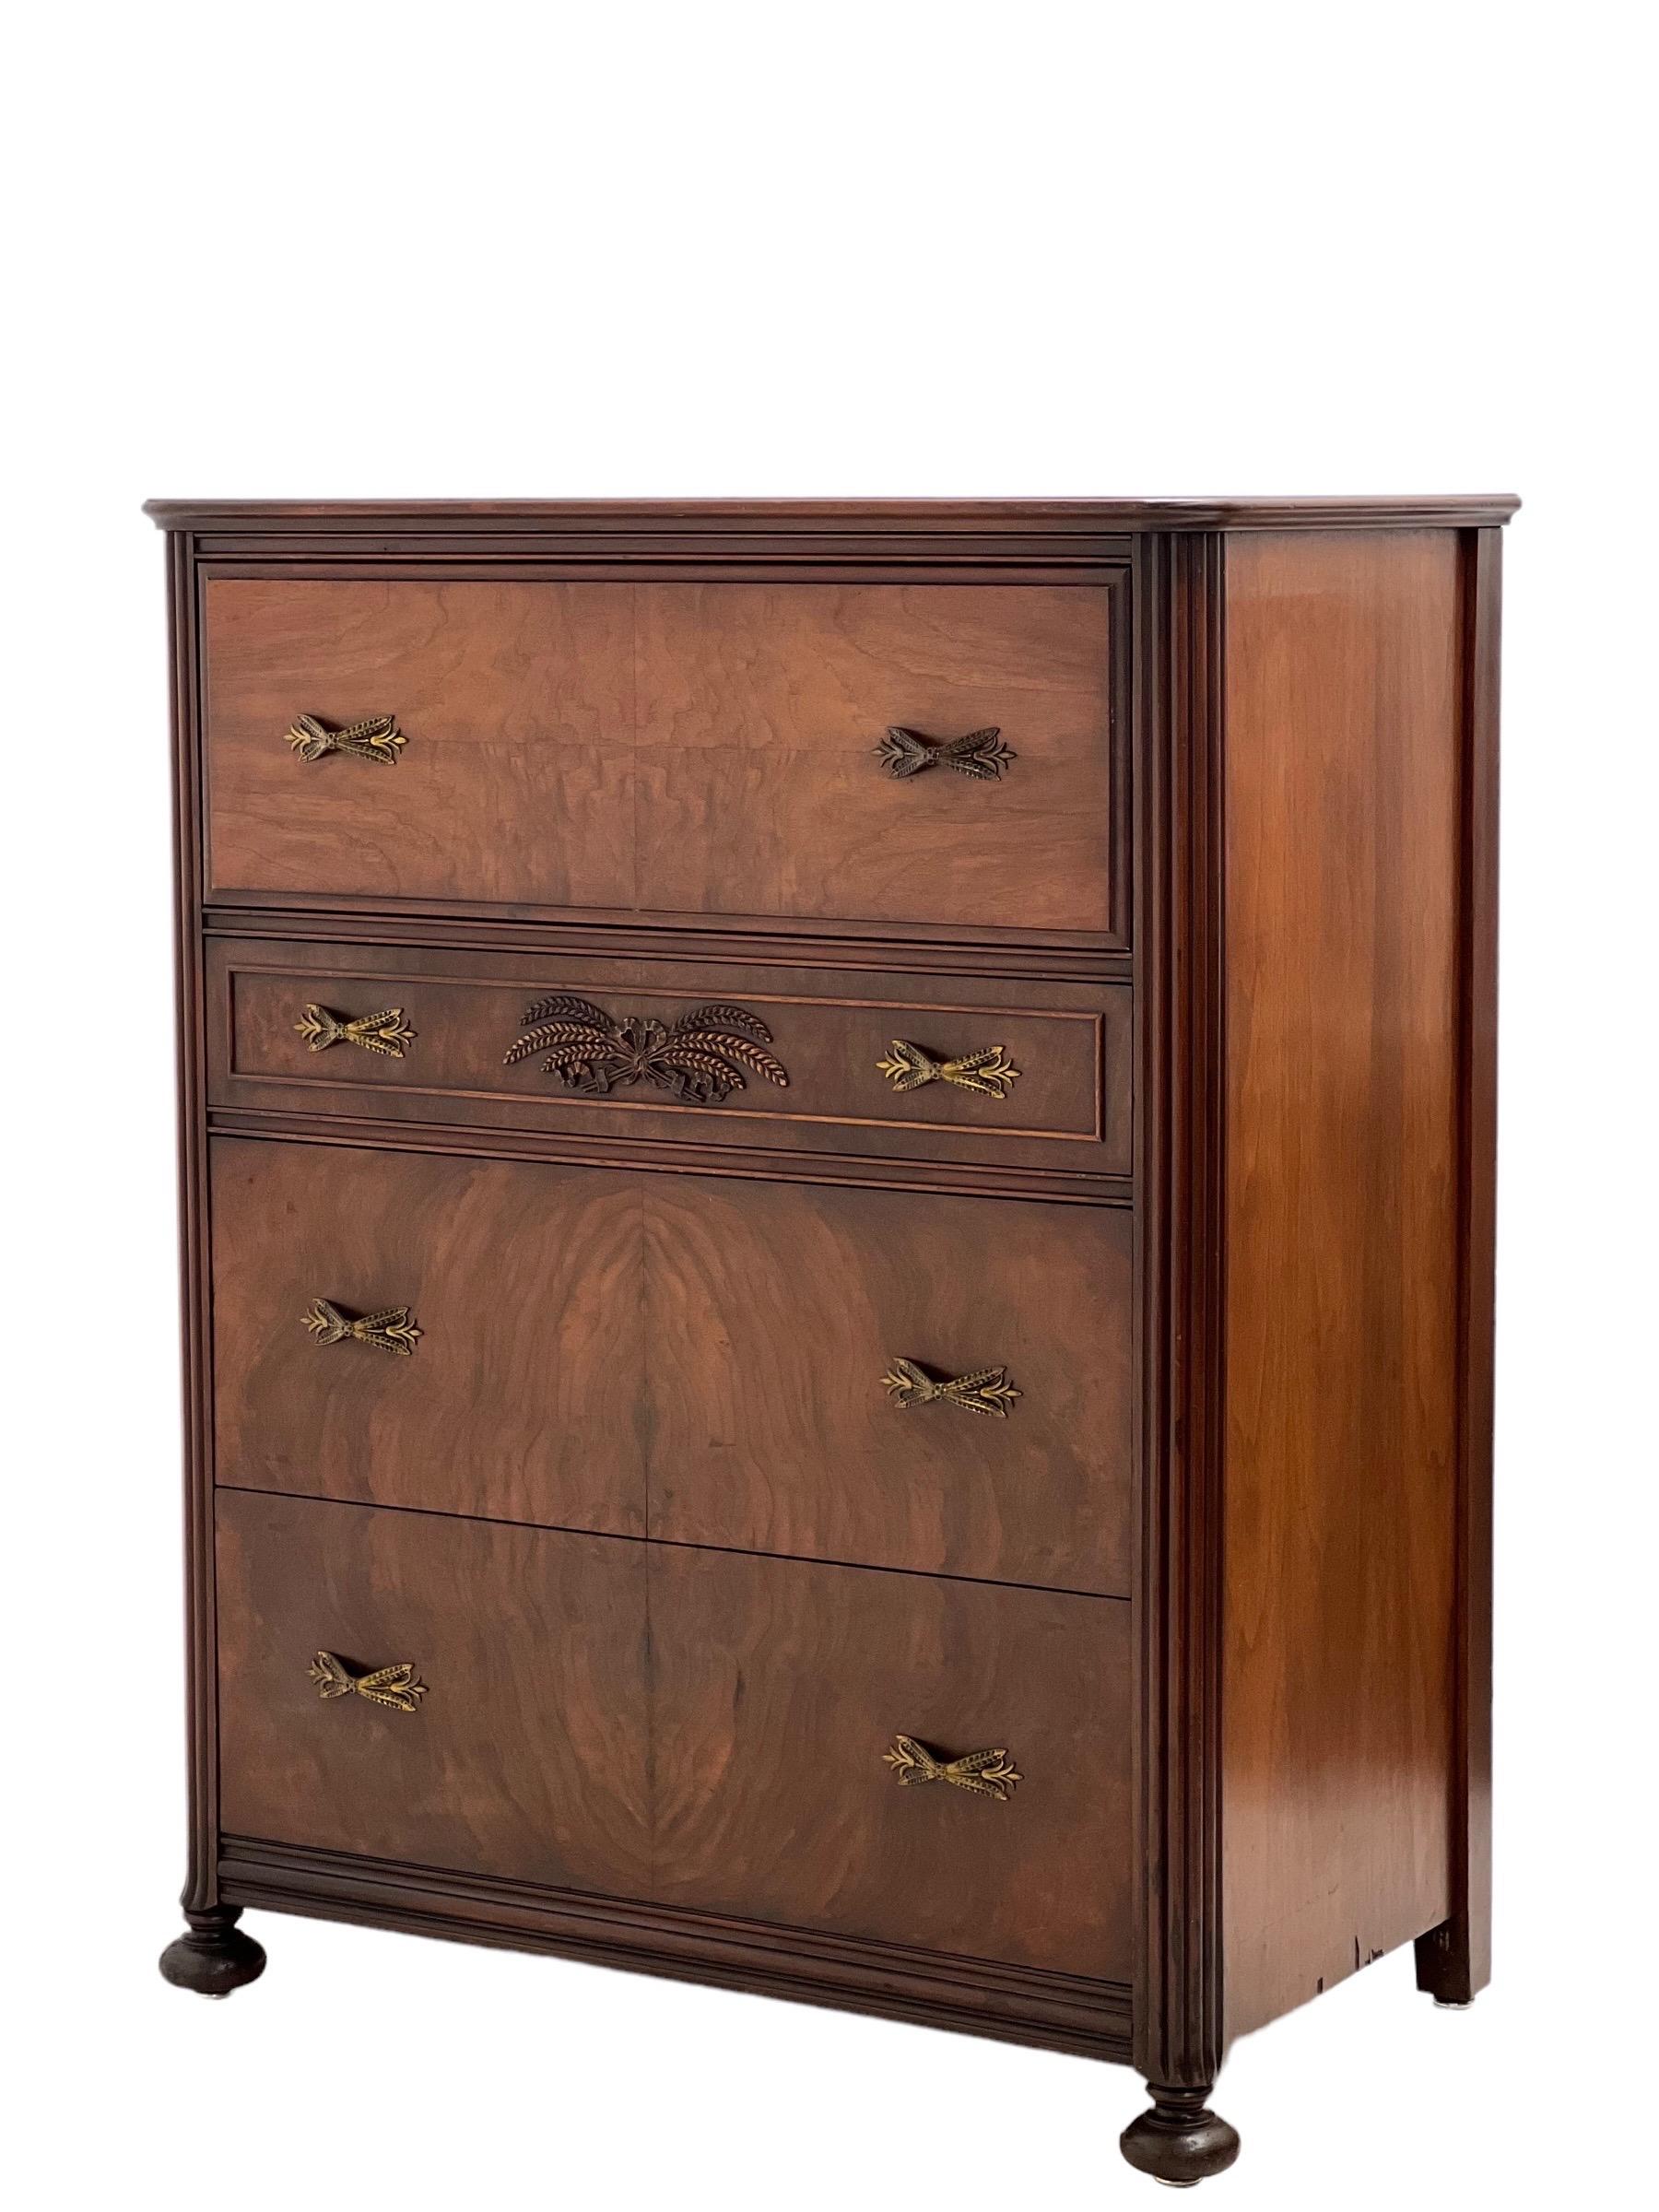 Vintage Regency style Walnut and Mahogany burl wood dresser with ornate handles and details

Dimensions: 32 W 19 D 40 H.